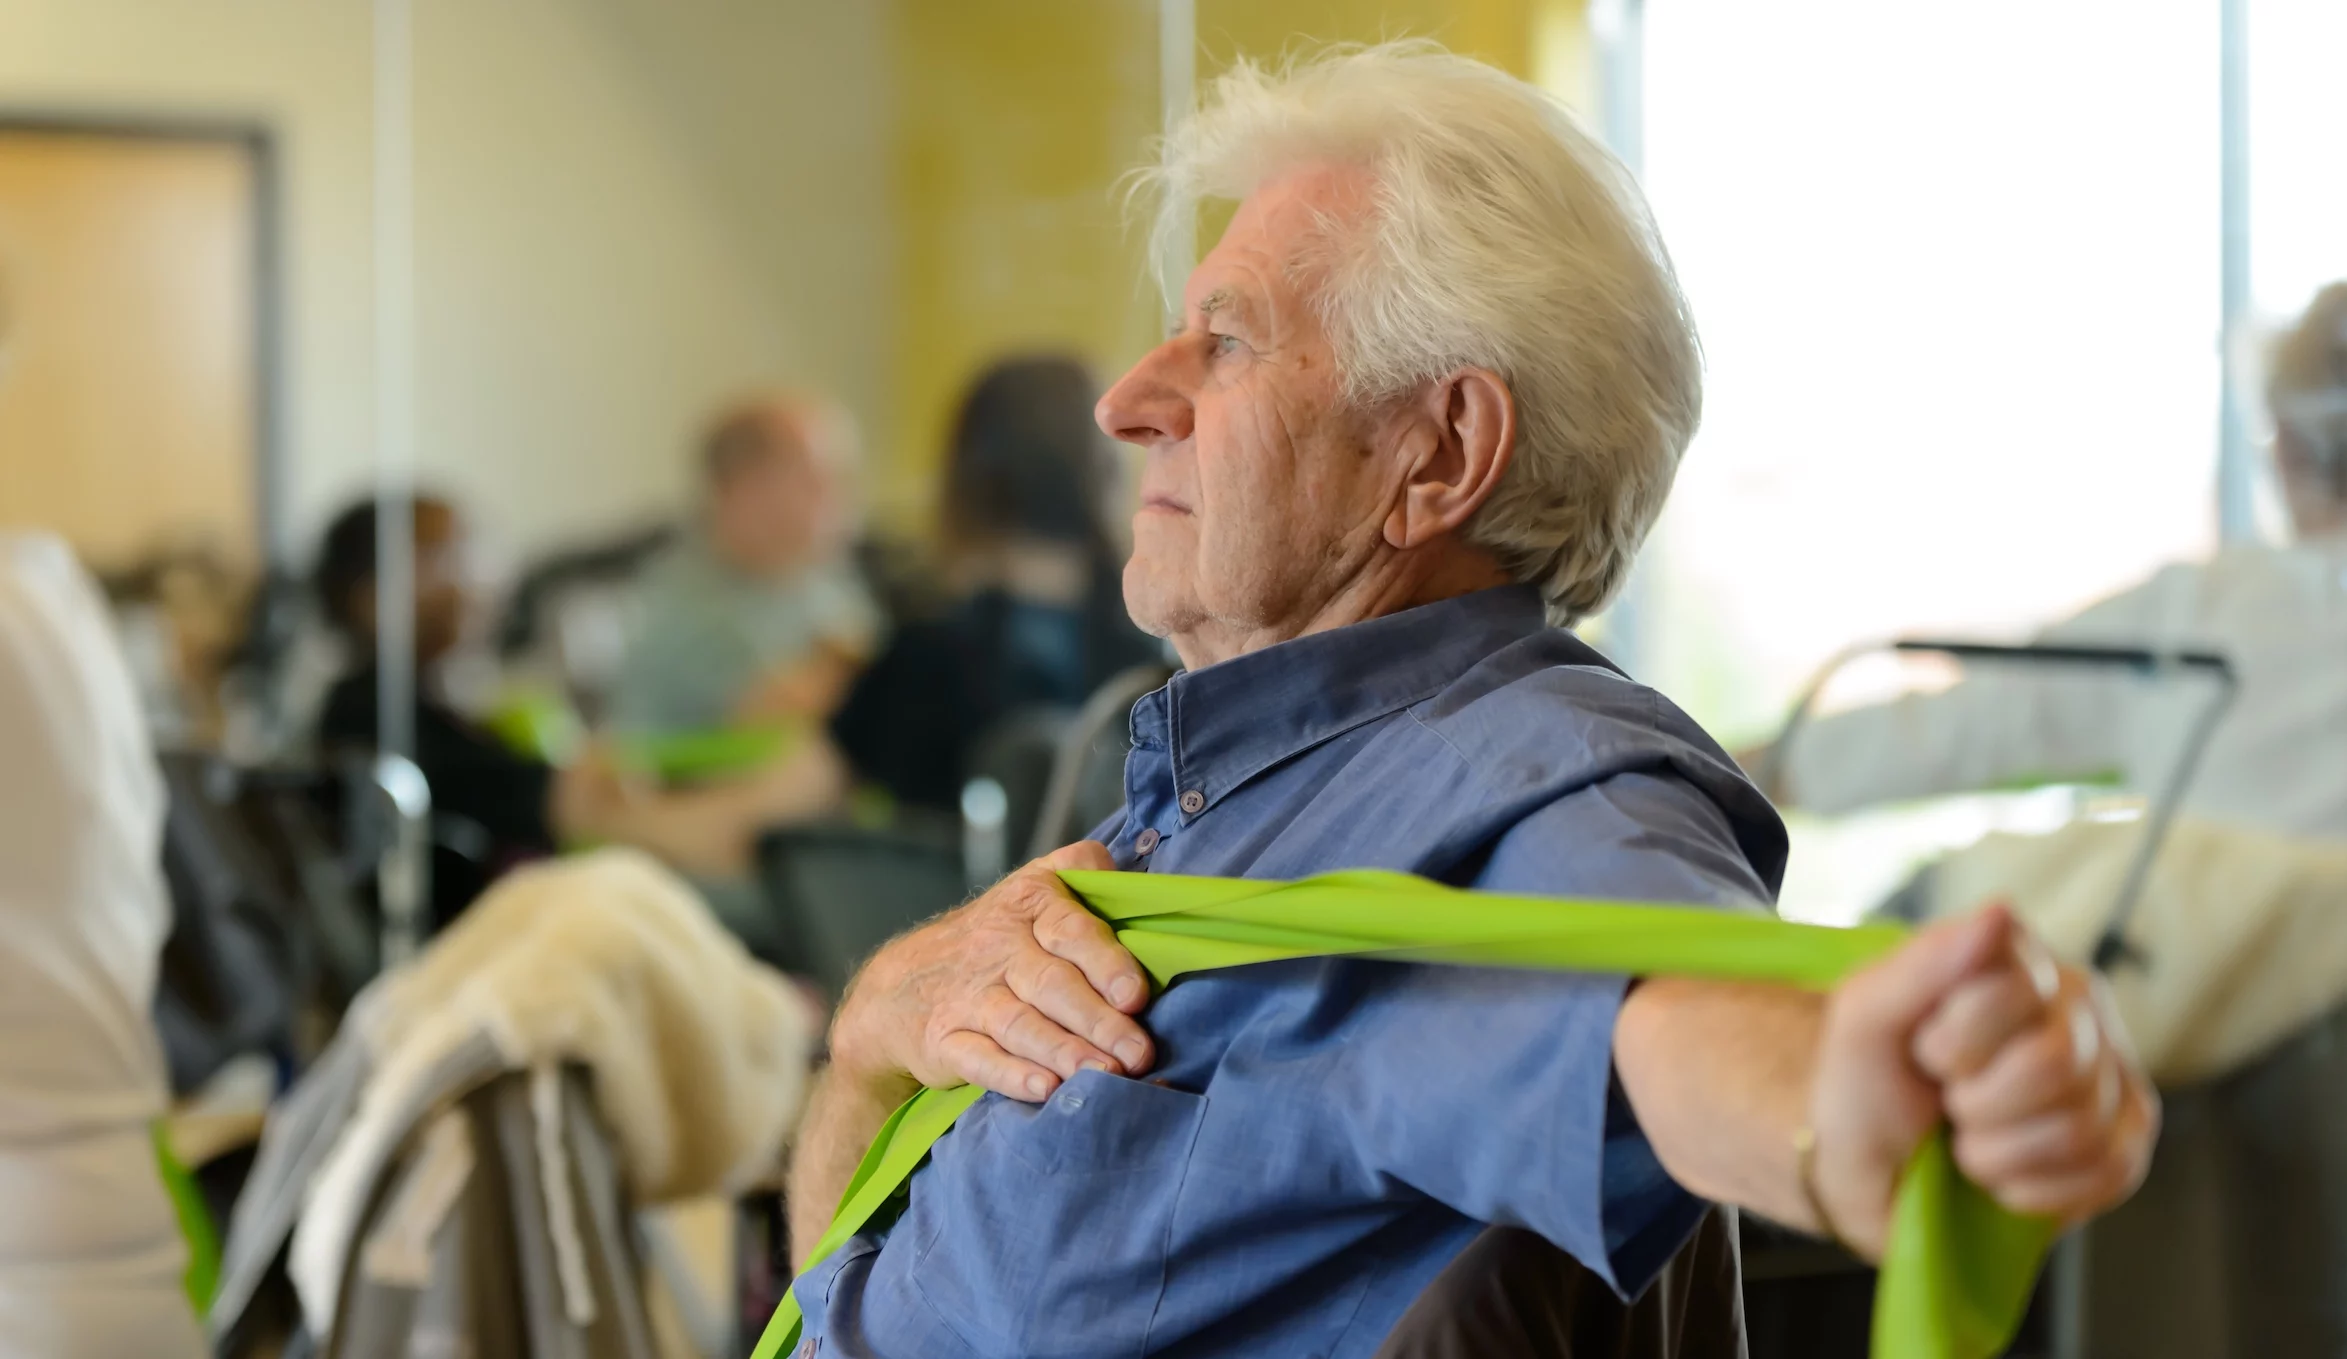 Mature man stretches exercise band